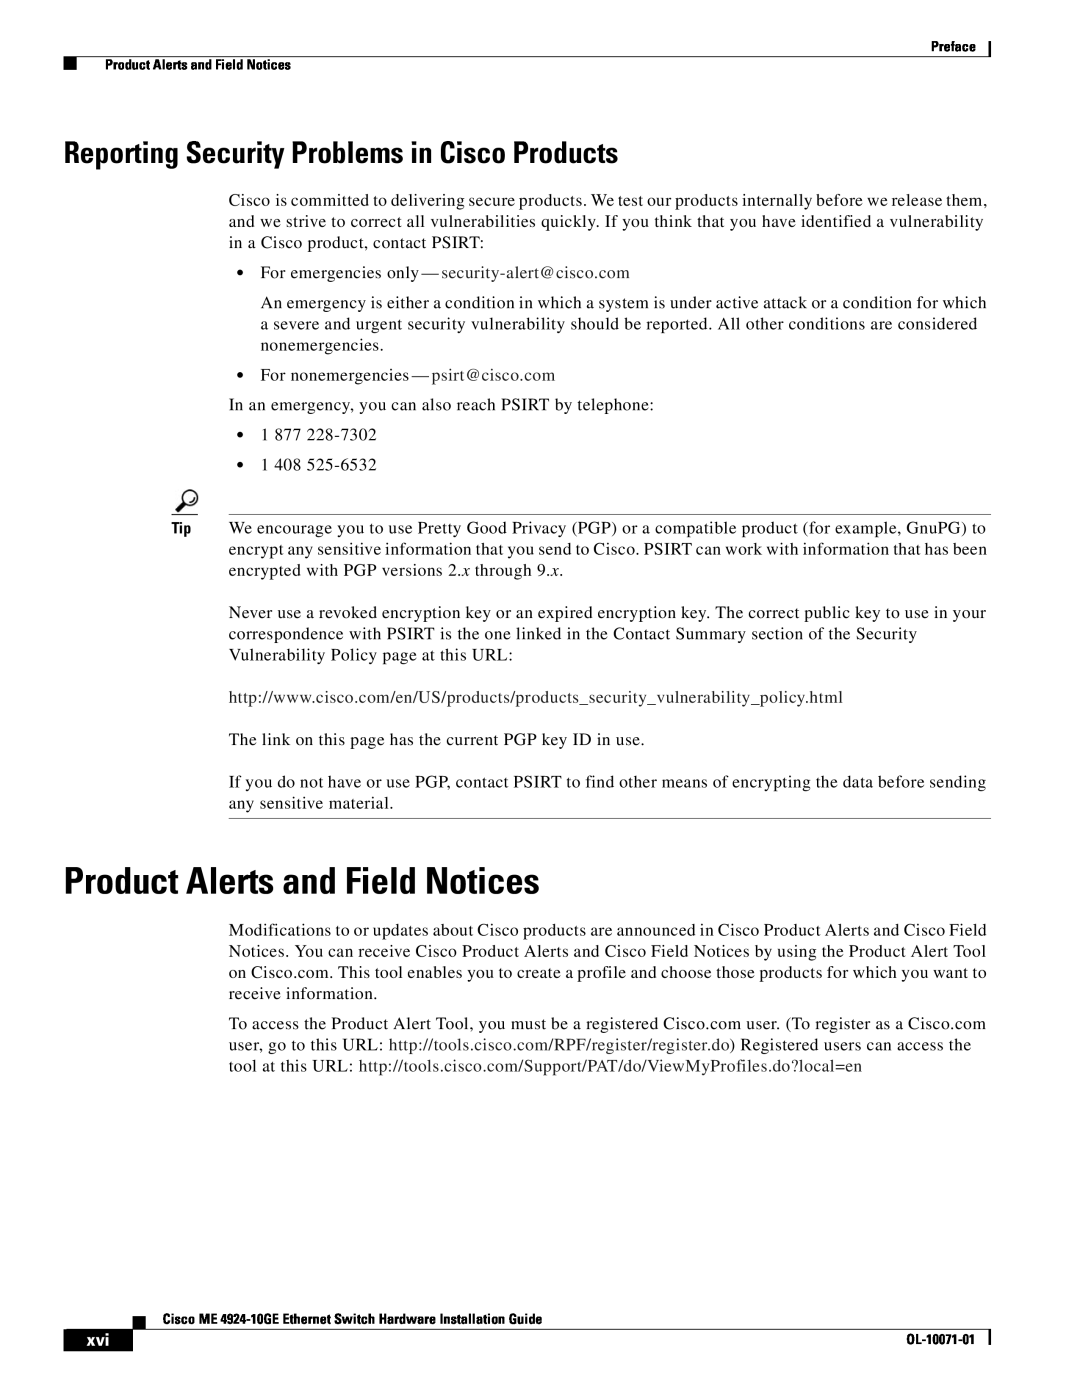 Cisco Systems ME 4924-10GE manual Product Alerts and Field Notices, Reporting Security Problems in Cisco Products 